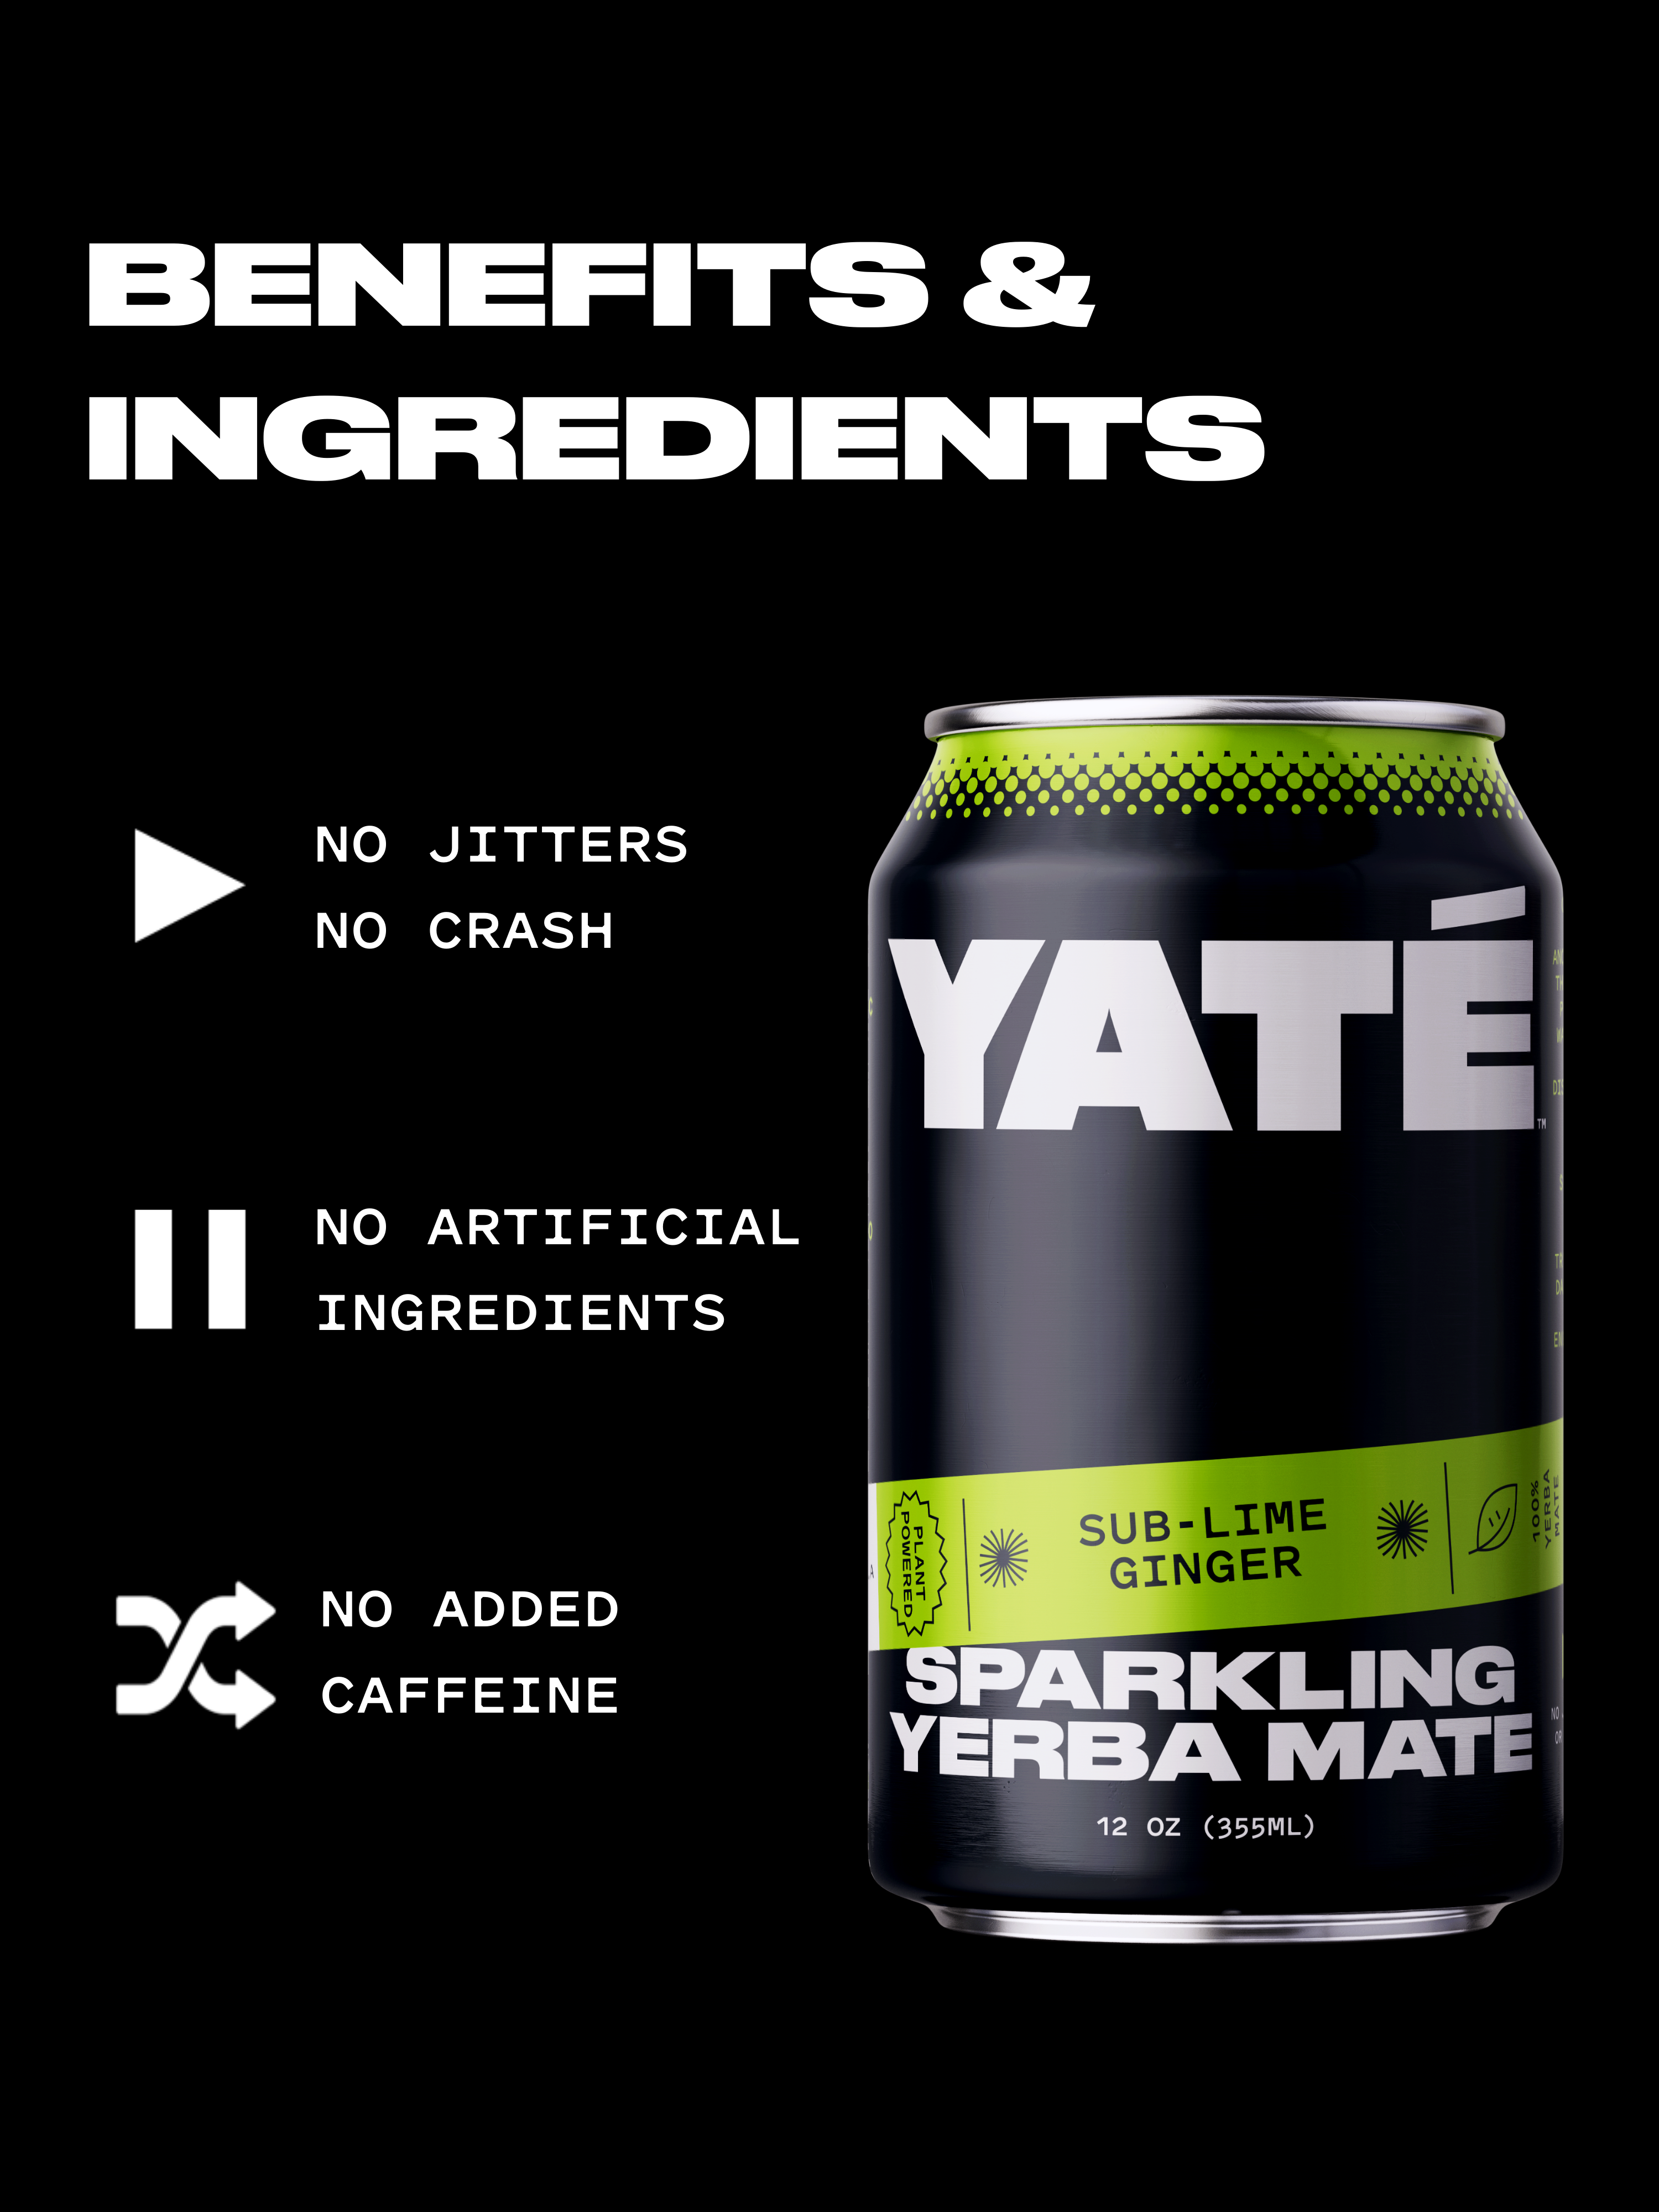 Yate Yerba Mate Sub-Lime Ginger Flavor 12oz Can Benefits & Ingredients